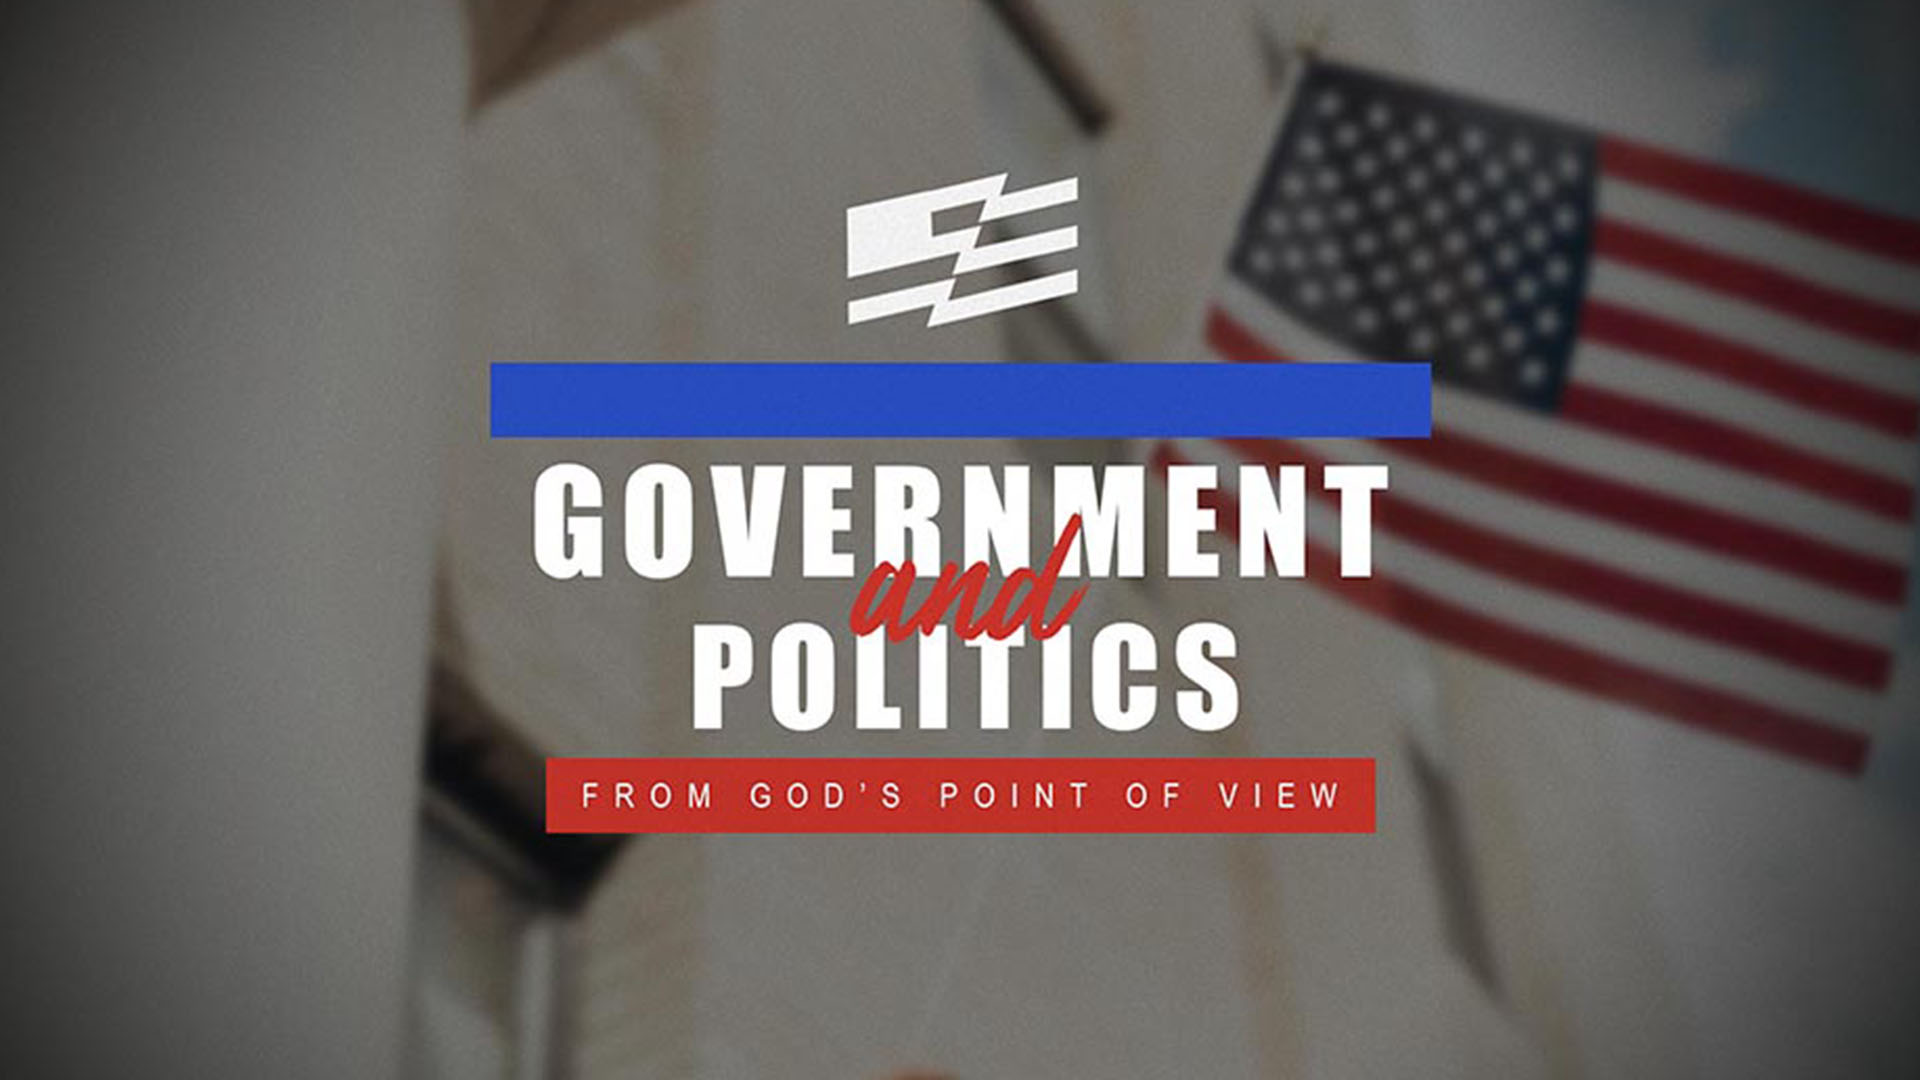 Government and Politics from God's Point of View

Saturday | 5:00pm
October 15 & 22
